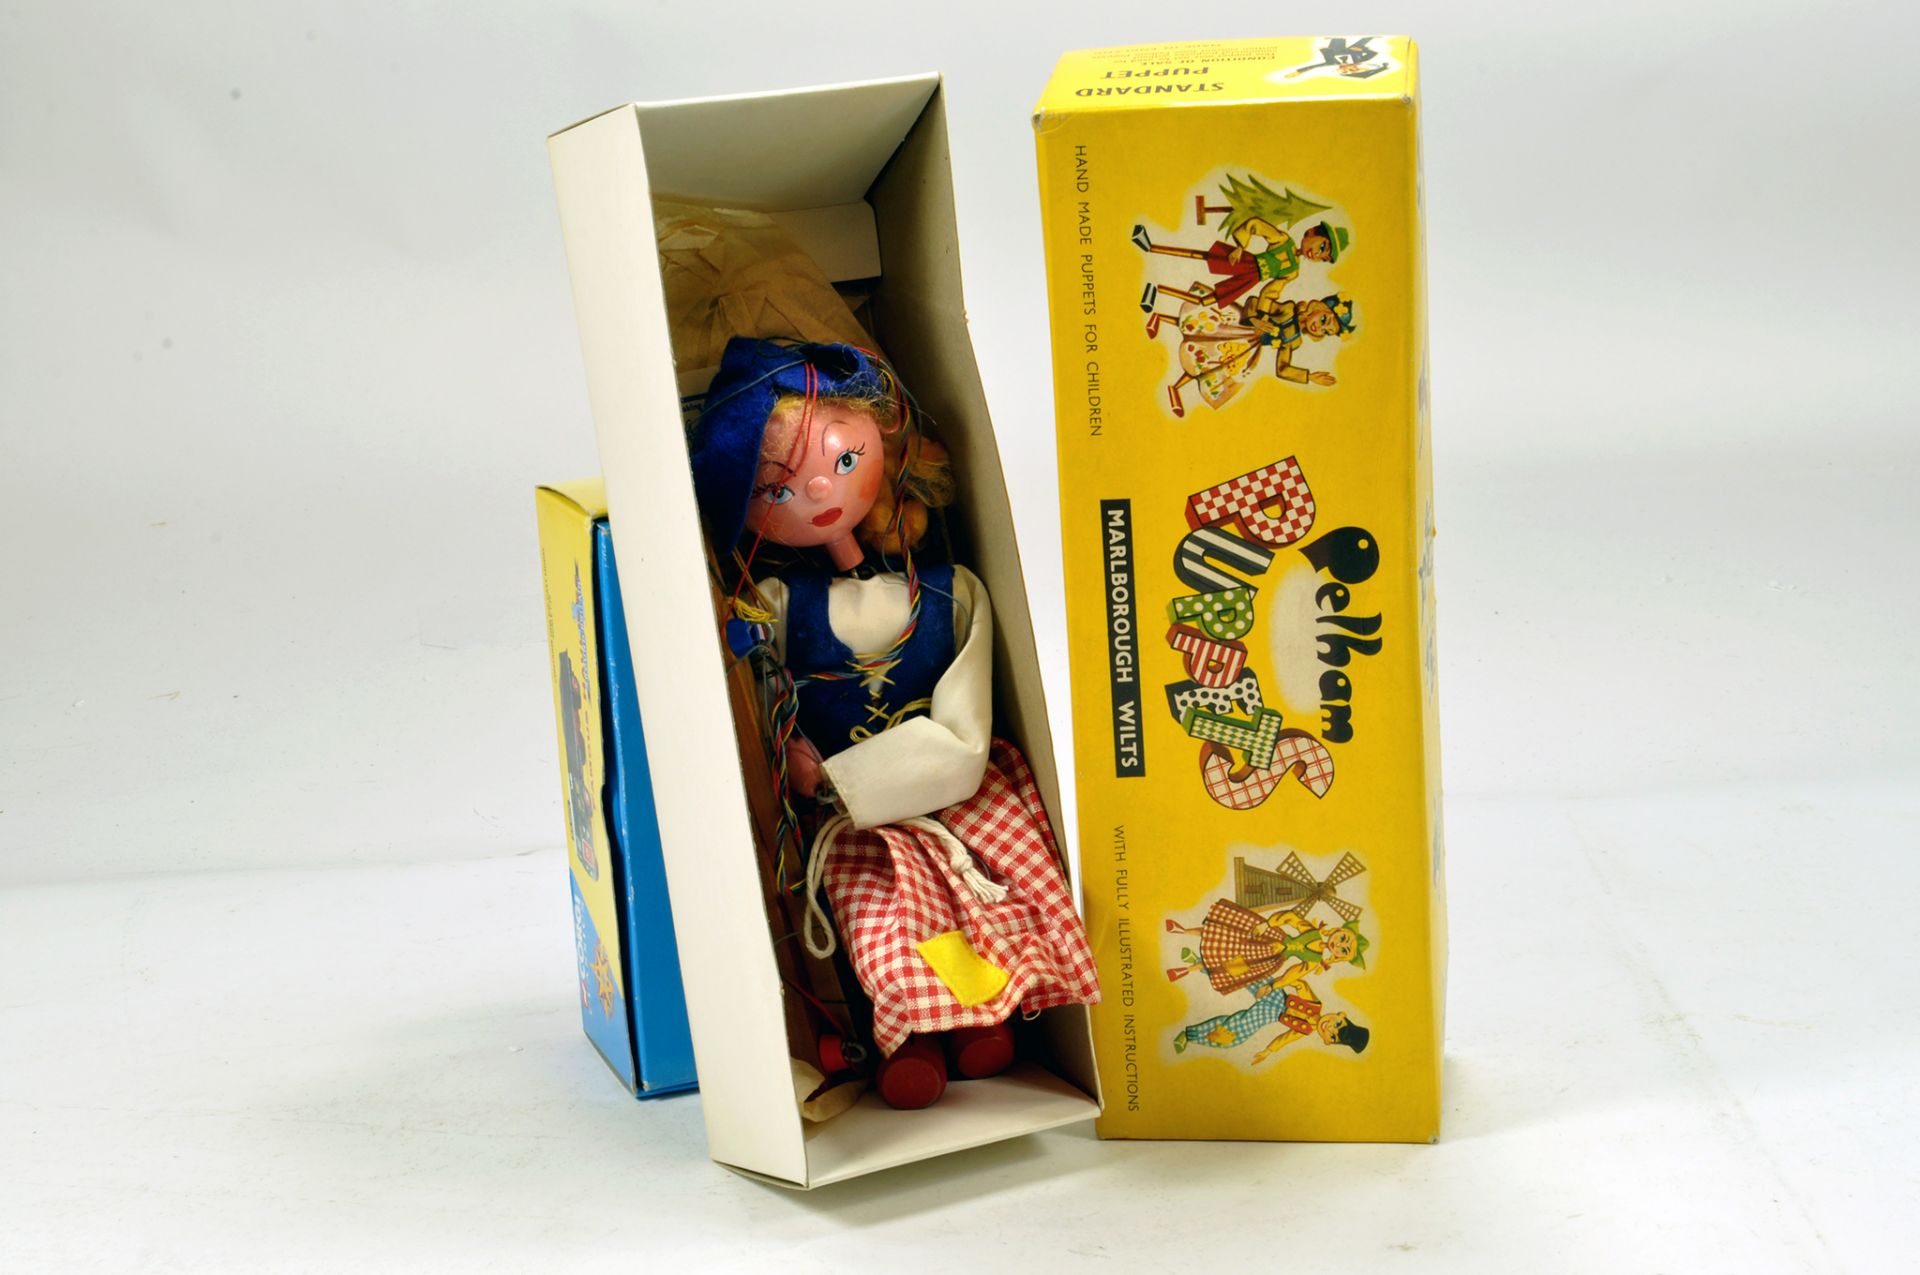 Pelham Puppets issue comprising Tyrolean Girl. Generally E in Box.